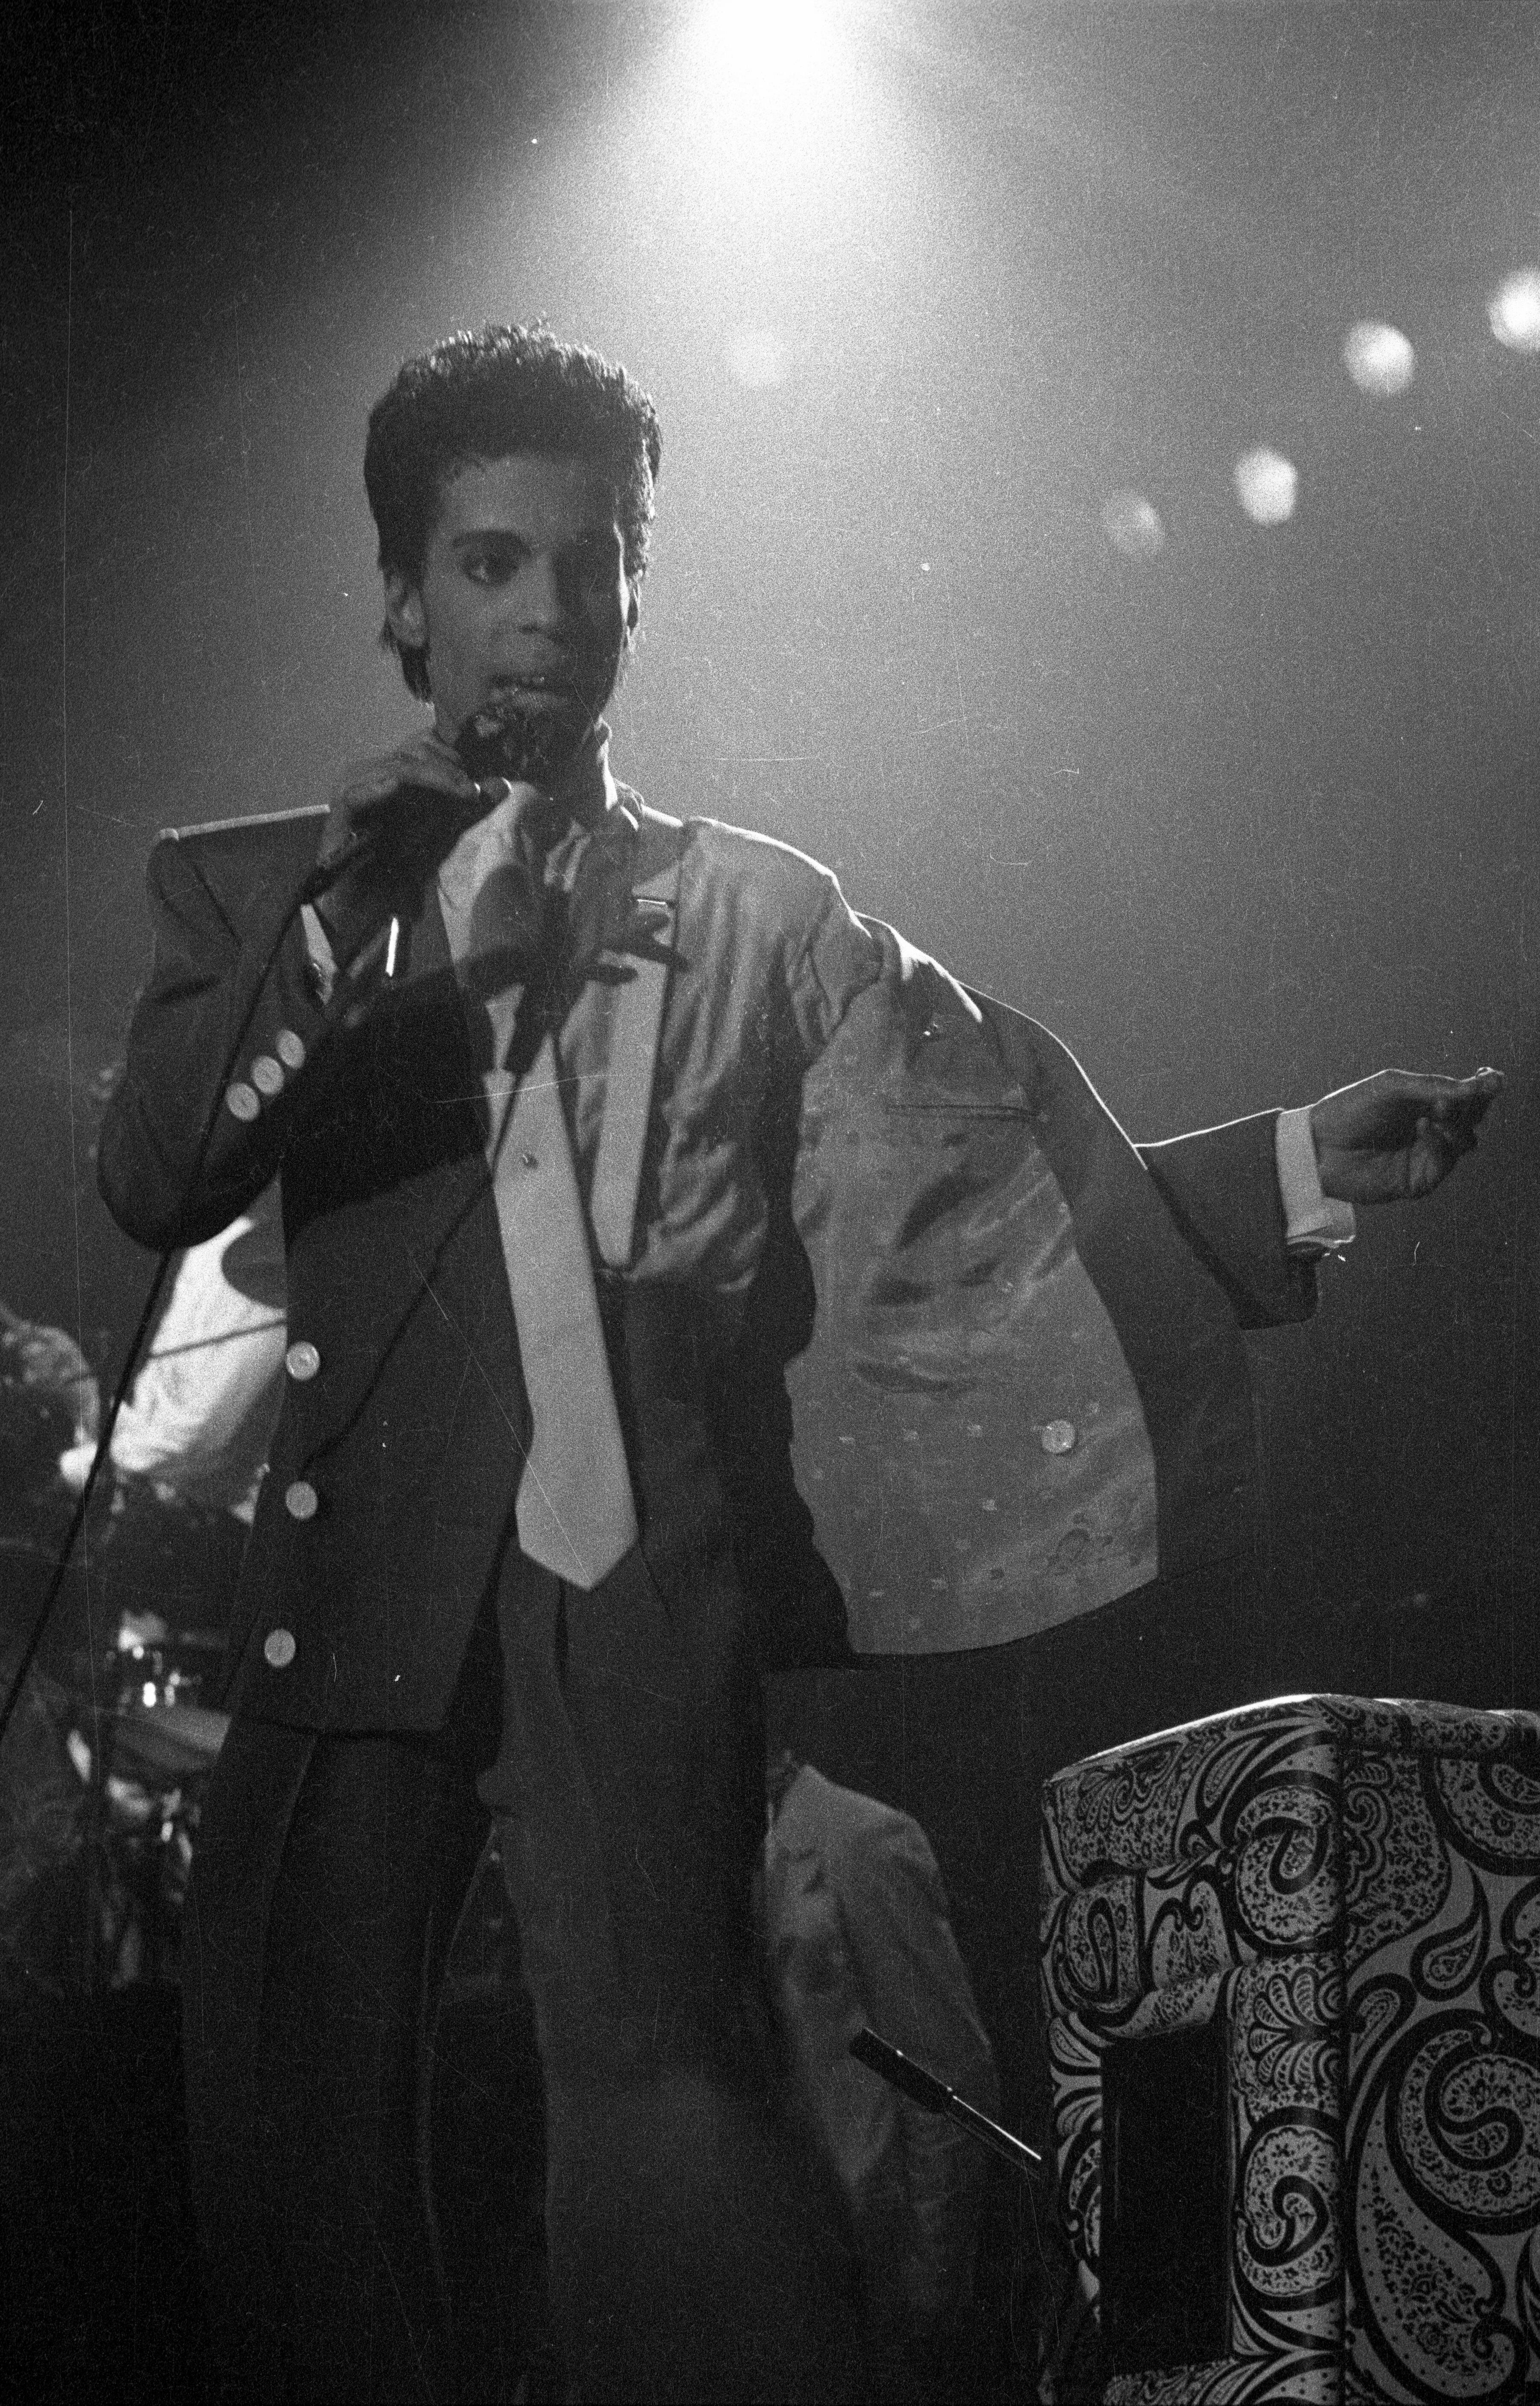 https://static.wikia.nocookie.net/everythingentertainmentfanon/images/2/2f/Prince_Brussels_1986.jpg/revision/latest/scale-to-width-down/3603?cb=20220614014505